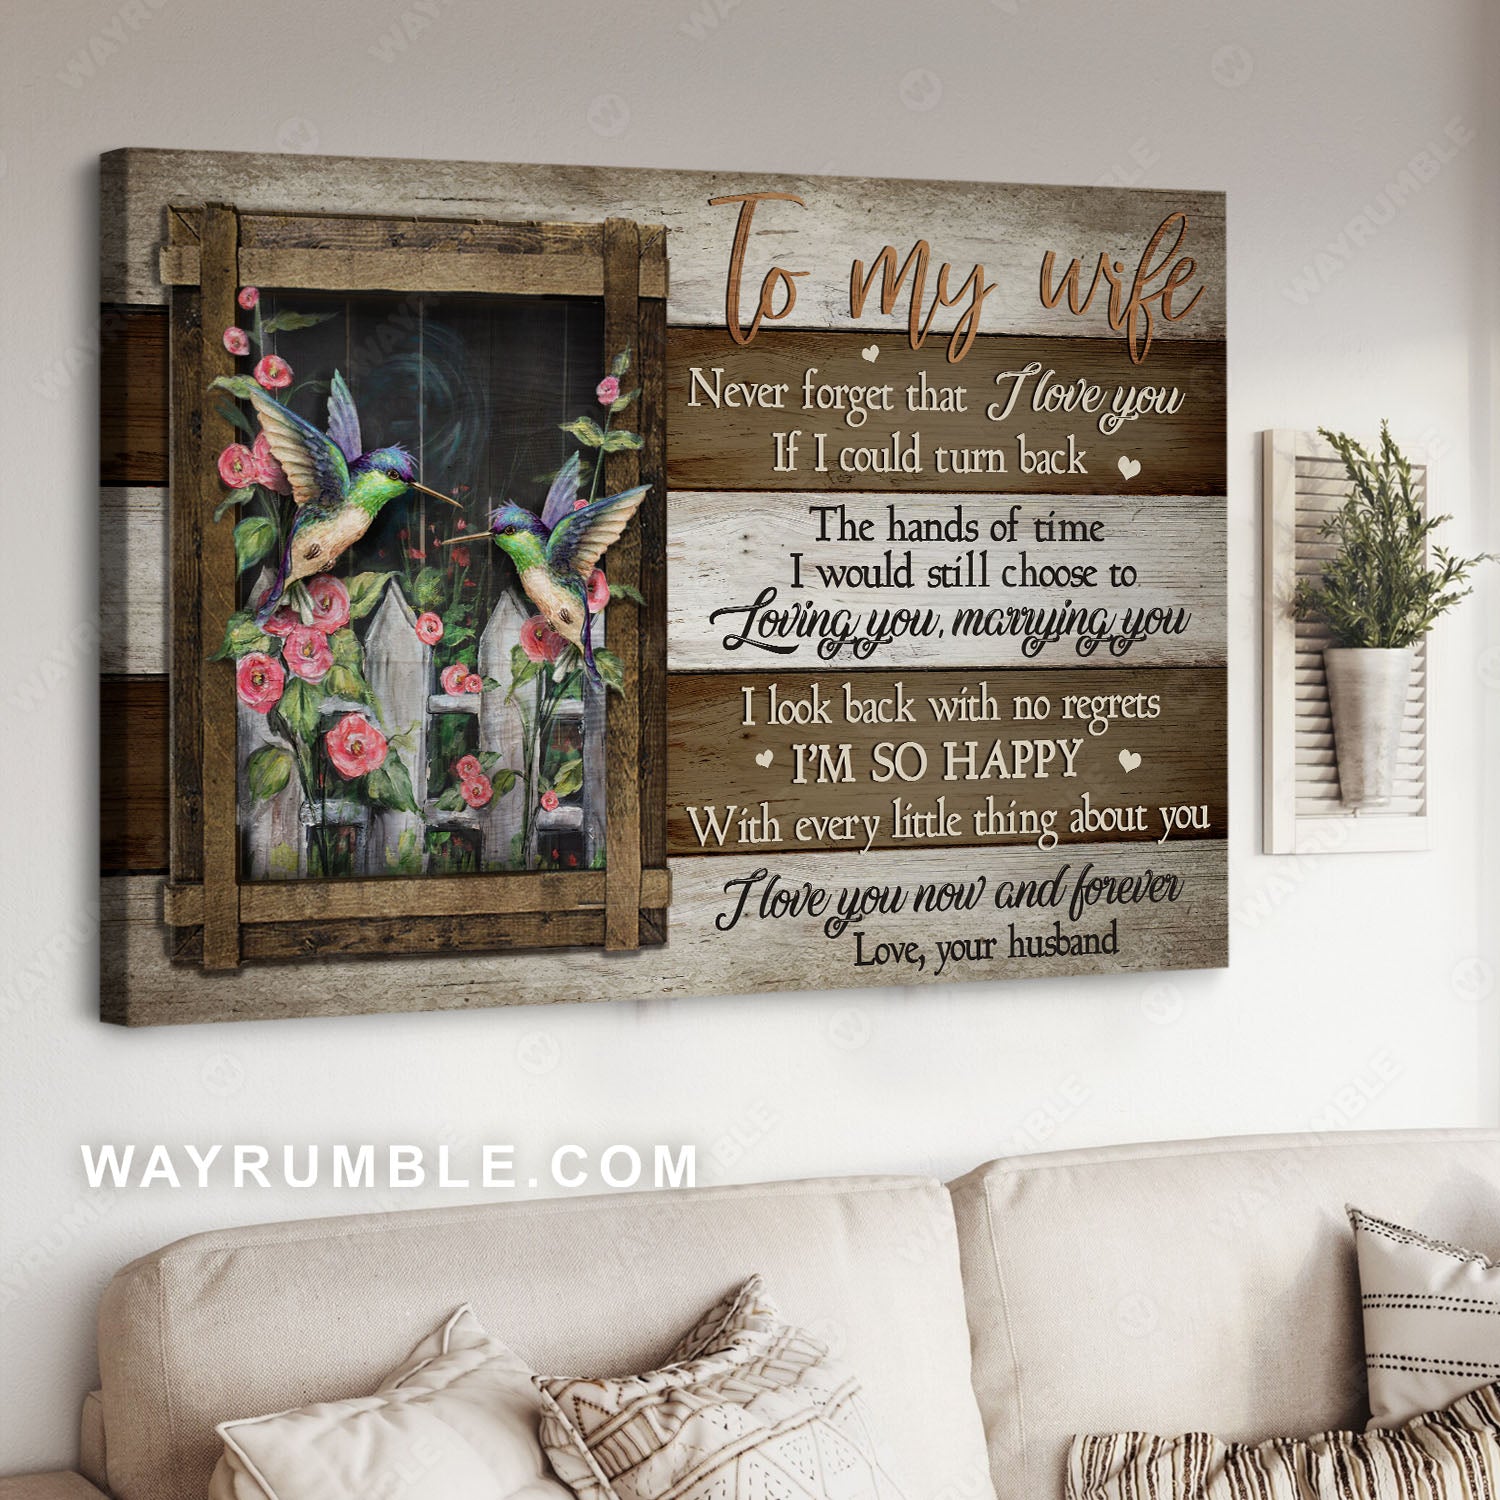 To my wife, Camellia garden, Hummingbird, I would still choose to loving you - Couple Landscape Canvas Prints, Wall Art